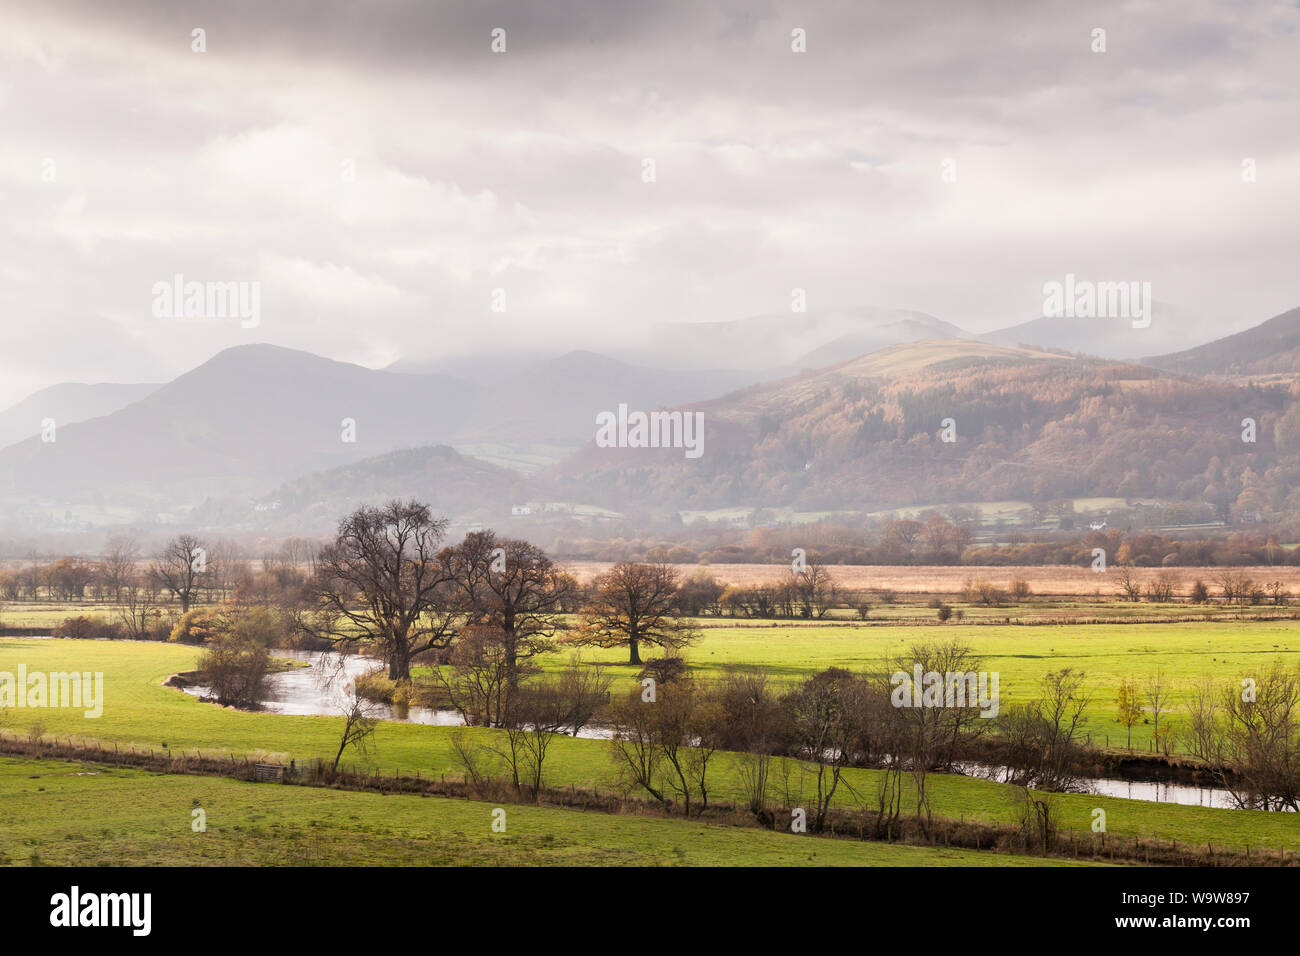 Mountainous scenery around the River Derwent near to Thirlmere in the Lake District national park. Stock Photo